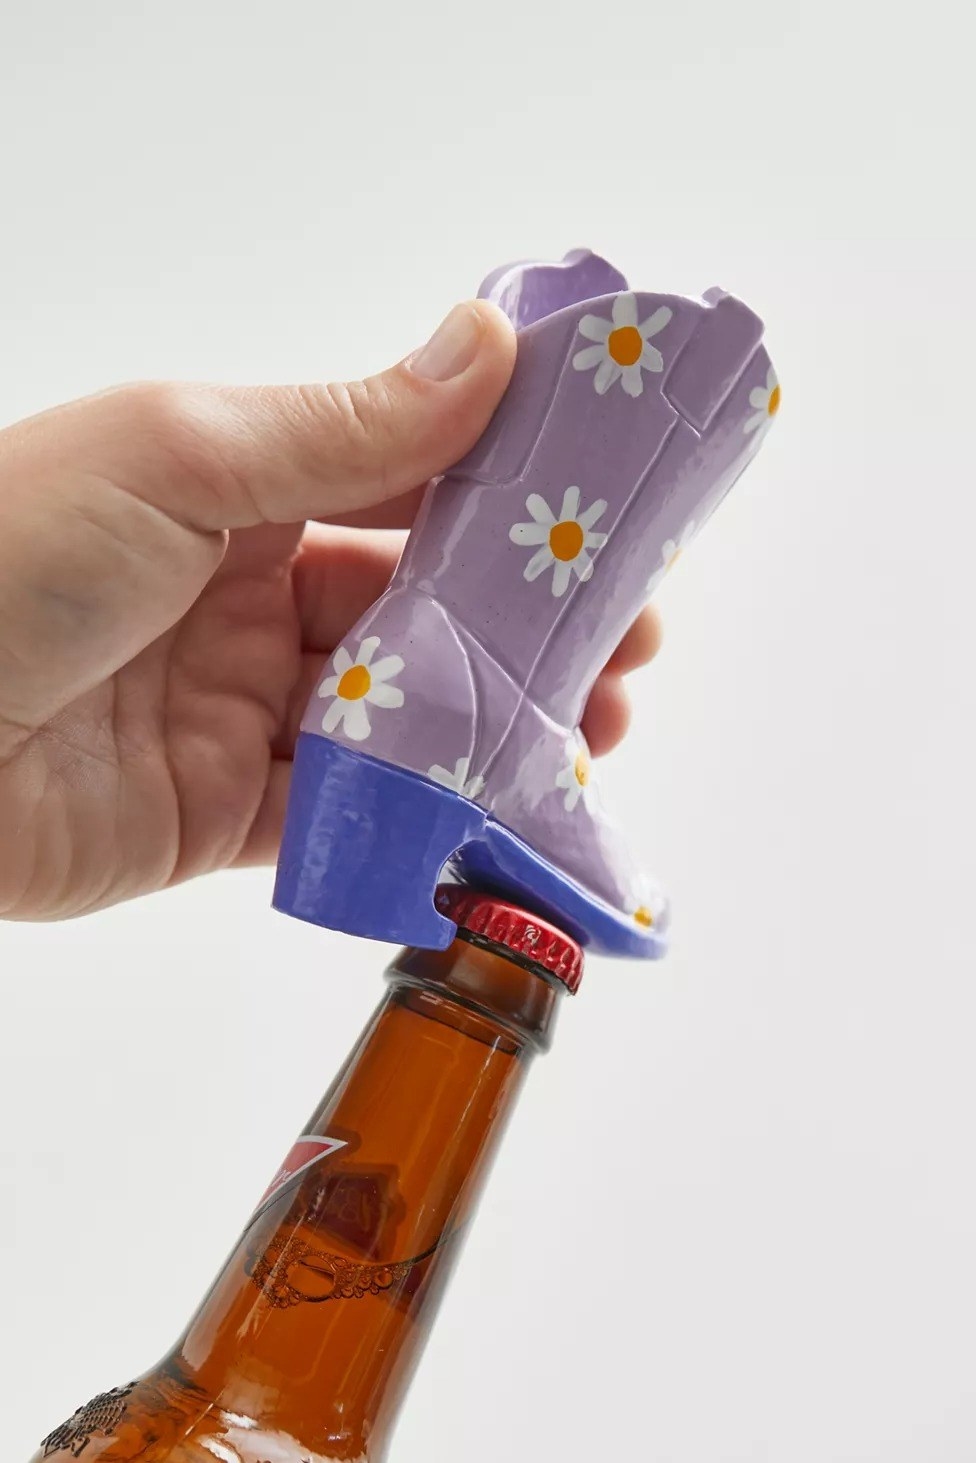 the purple boot with daisies on it being used to open a beer bottle